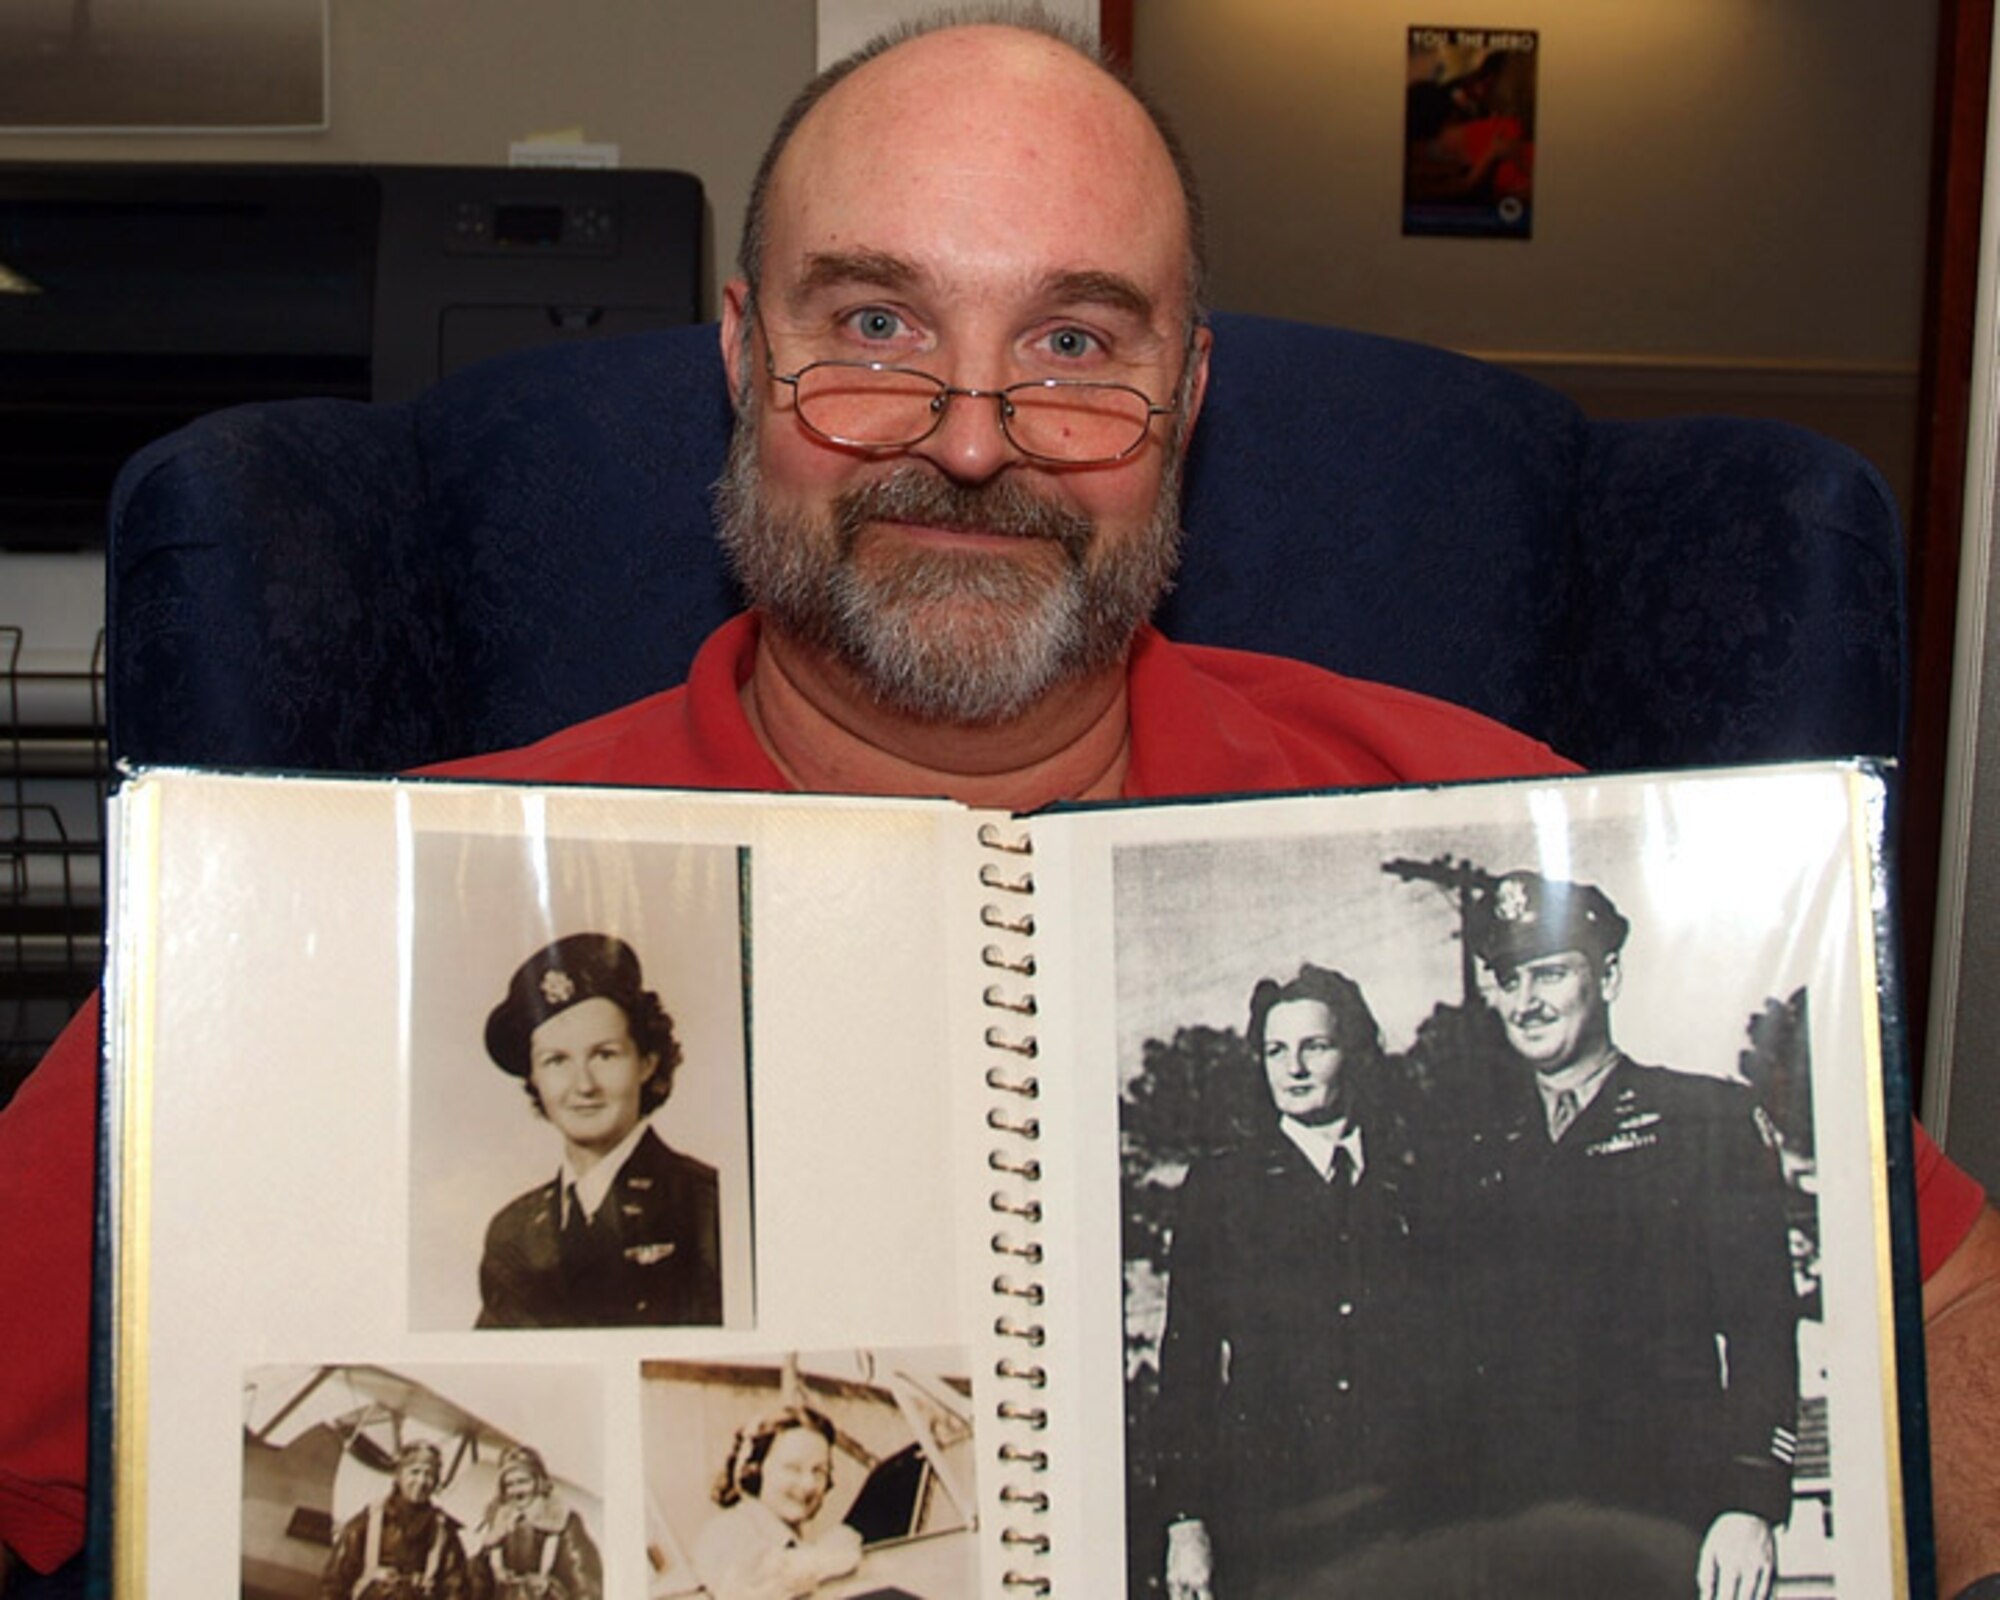 HURLBURT FIELD, Fla. -- Rich Williams, a civilian employee at Hurlburt Field, holds a photo album showing his mother, Lesley Stroud Williams, when she flew for the Women Airforce Service Pilots program during World War II. The WASP were awarded the Congressional Gold Medal in recognizition of their service, which was kept under wraps for decades. The medal ceremony took place in Washington, D.C., March 10, during Women's History Month. (Air Force photo/Keith Keel)